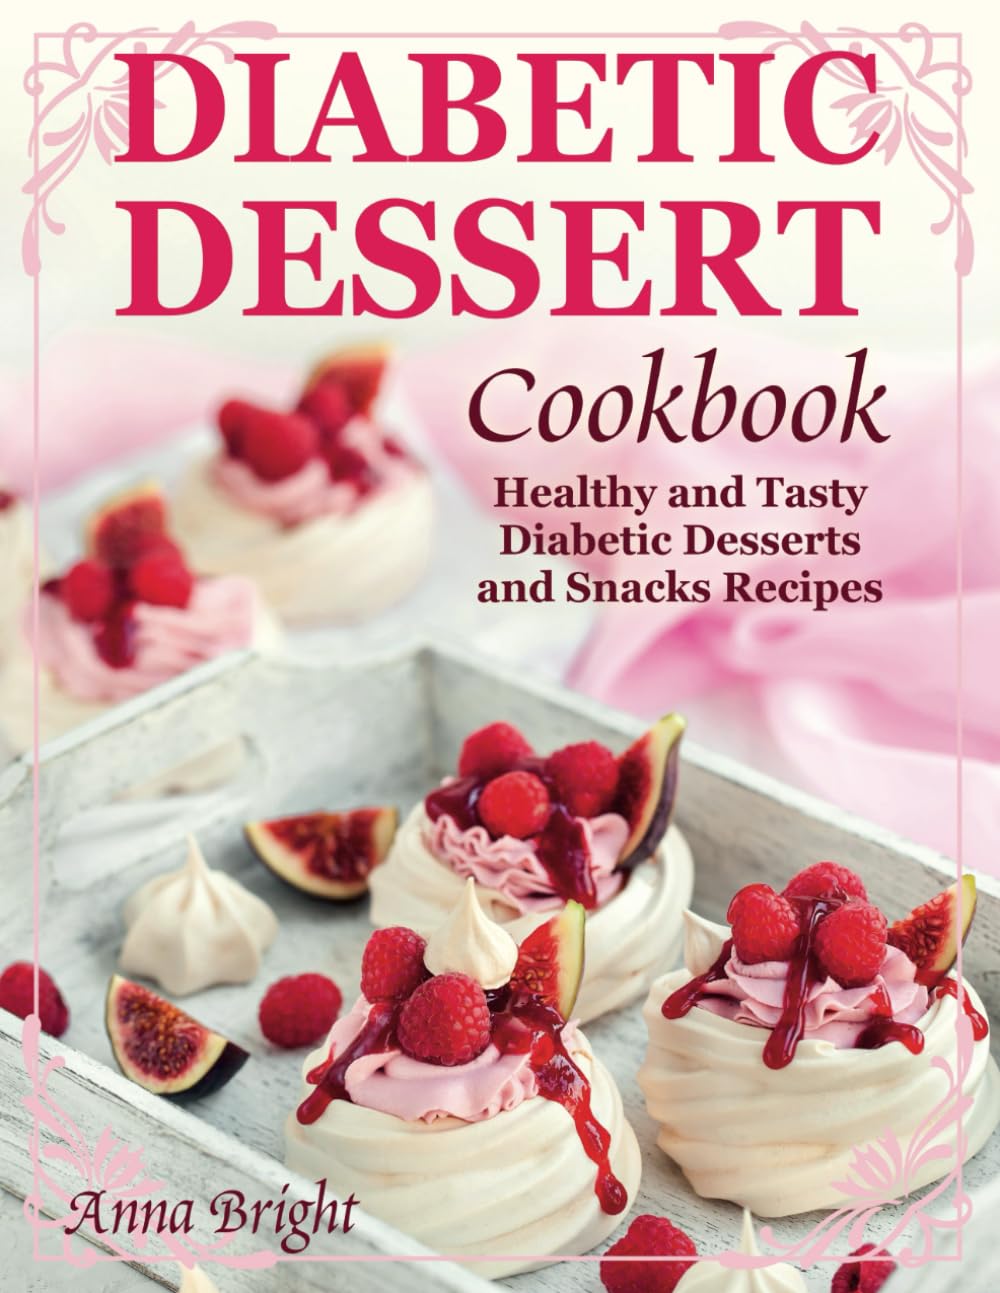 Diabetic Dessert Cookbook: Healthy and Tasty Diabetic Desserts and Snacks Recipes